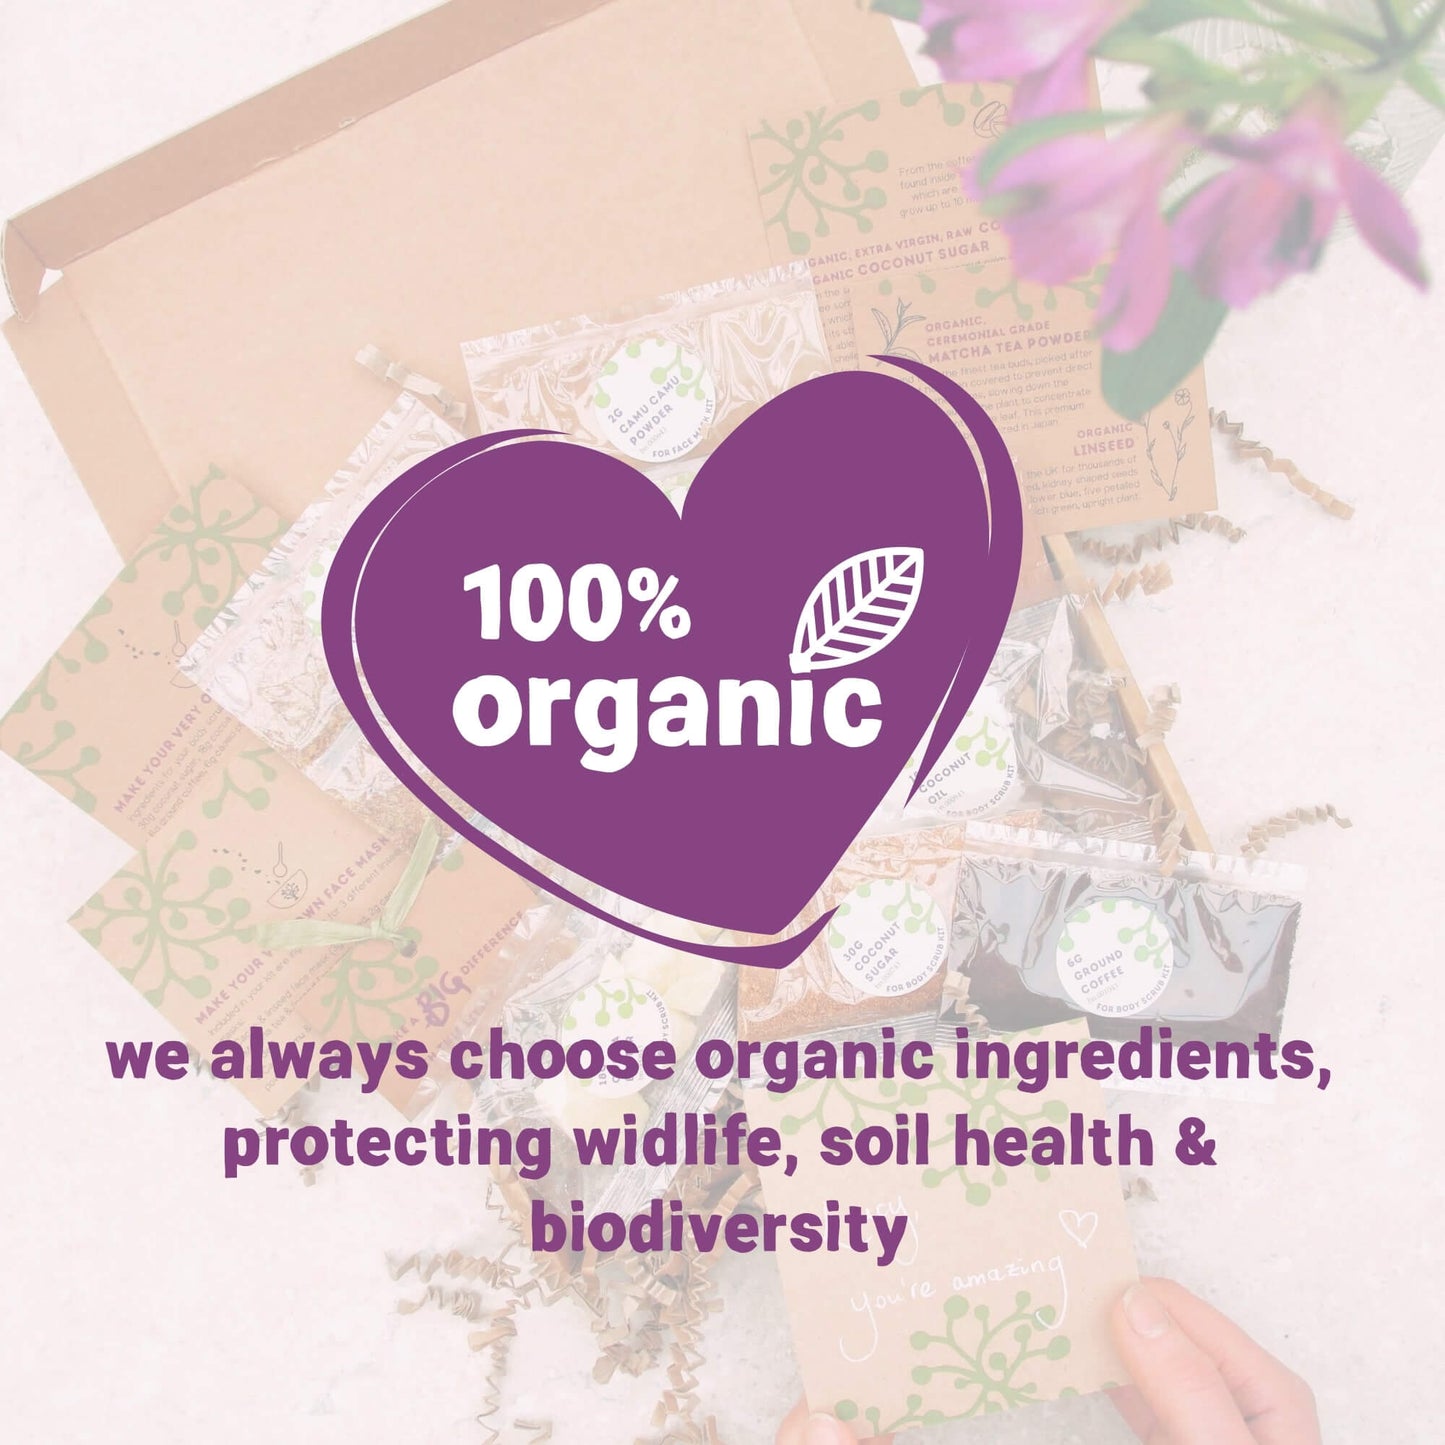 mum letterbox gift uses only organic ingredients to protect the environment